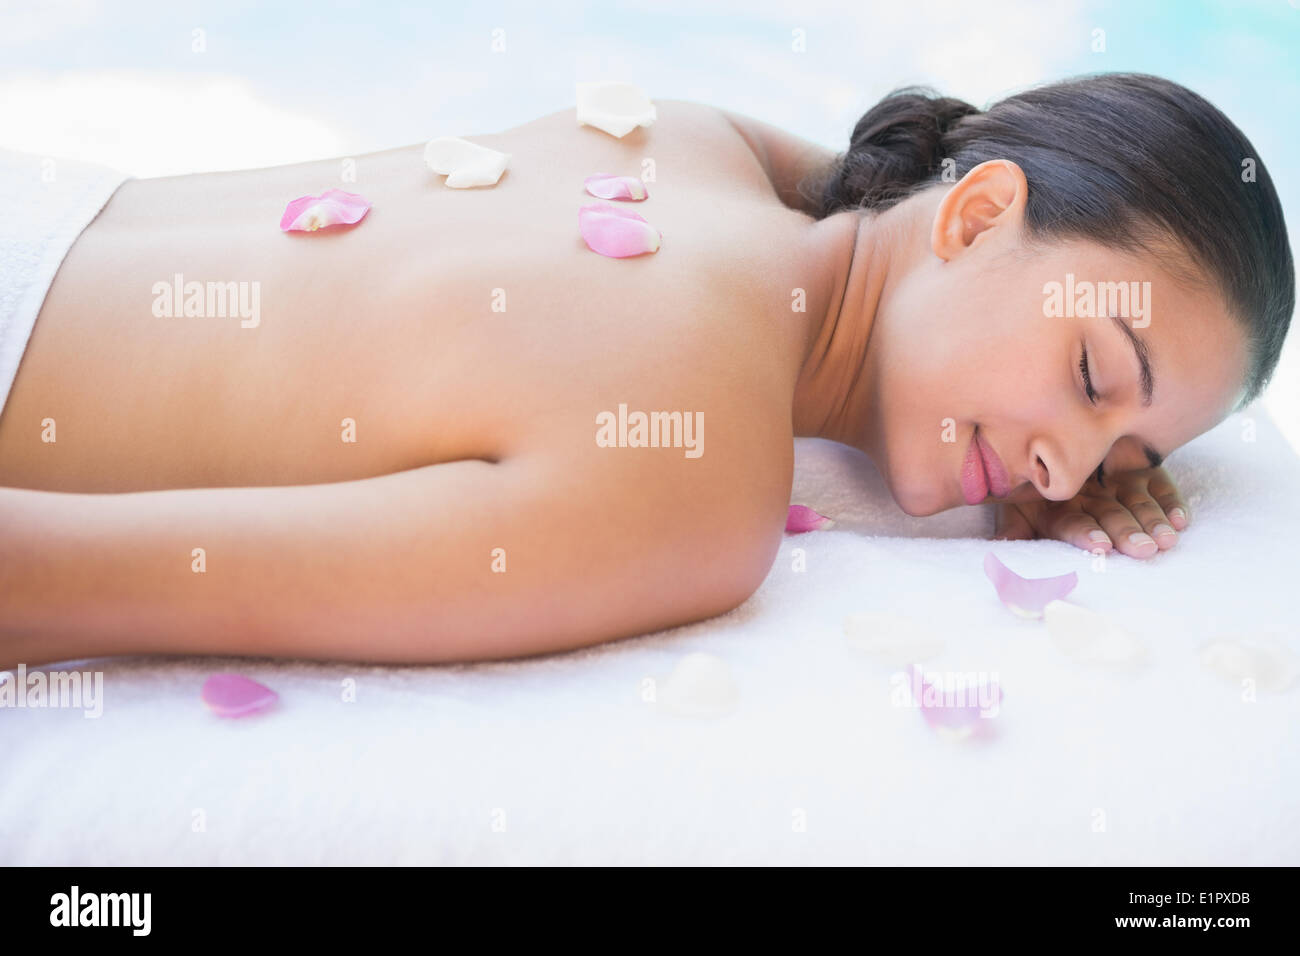 Smiling brunette lying on towel with rose petals Stock Photo